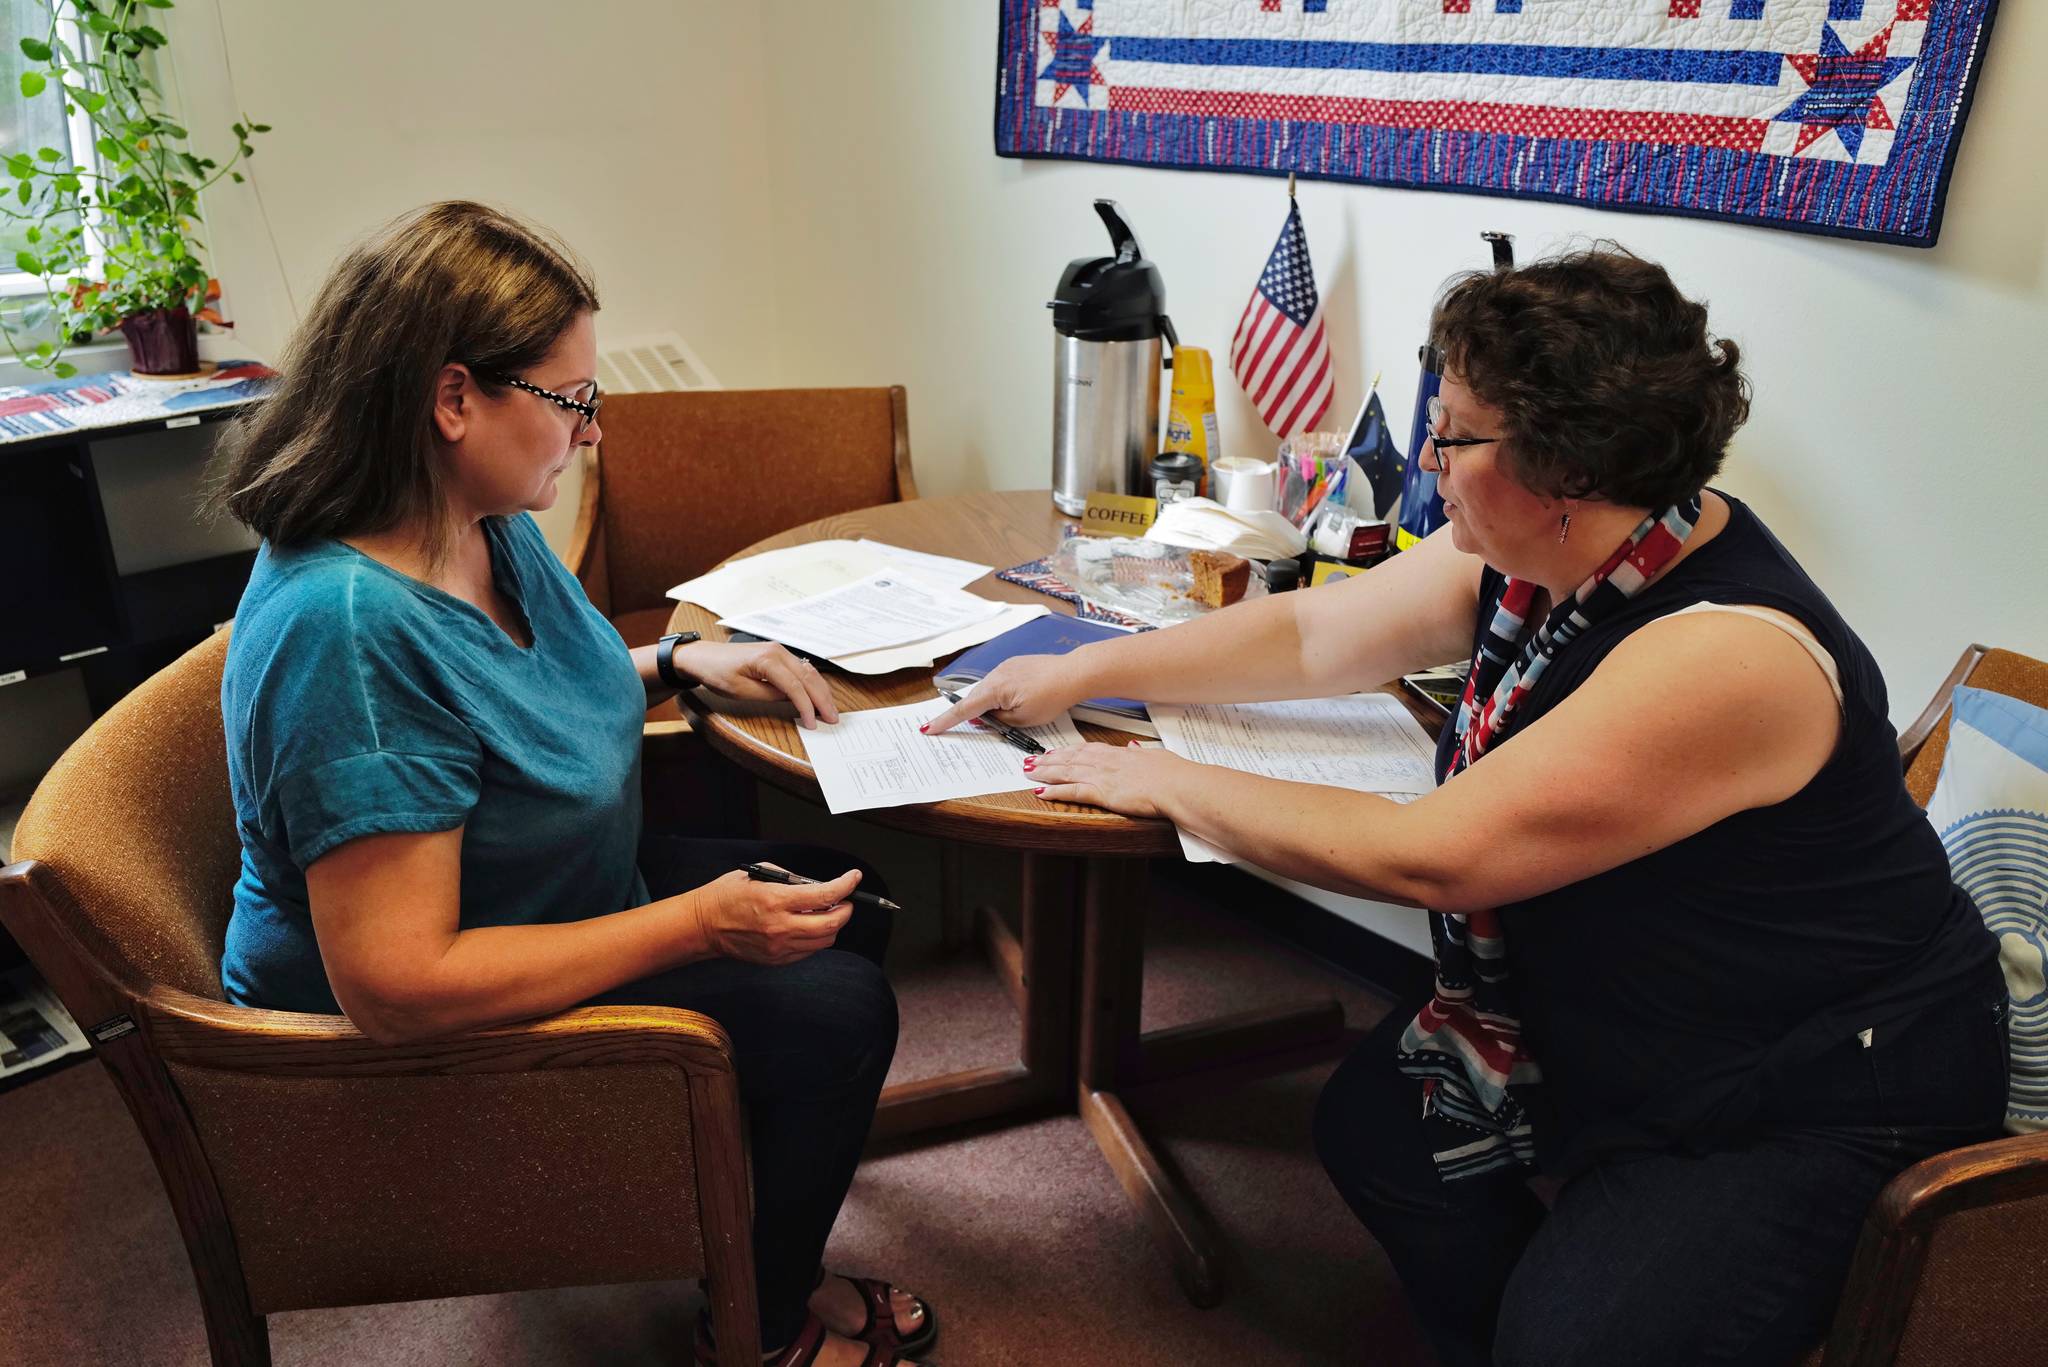 Amanda Ryder, left, signs her application for Municipal Clerk Beth McEwen on Monday, Aug. 12, 2019, to run for one of two open school board seats in this falls municipal election. (Michael Penn | Juneau Empire)